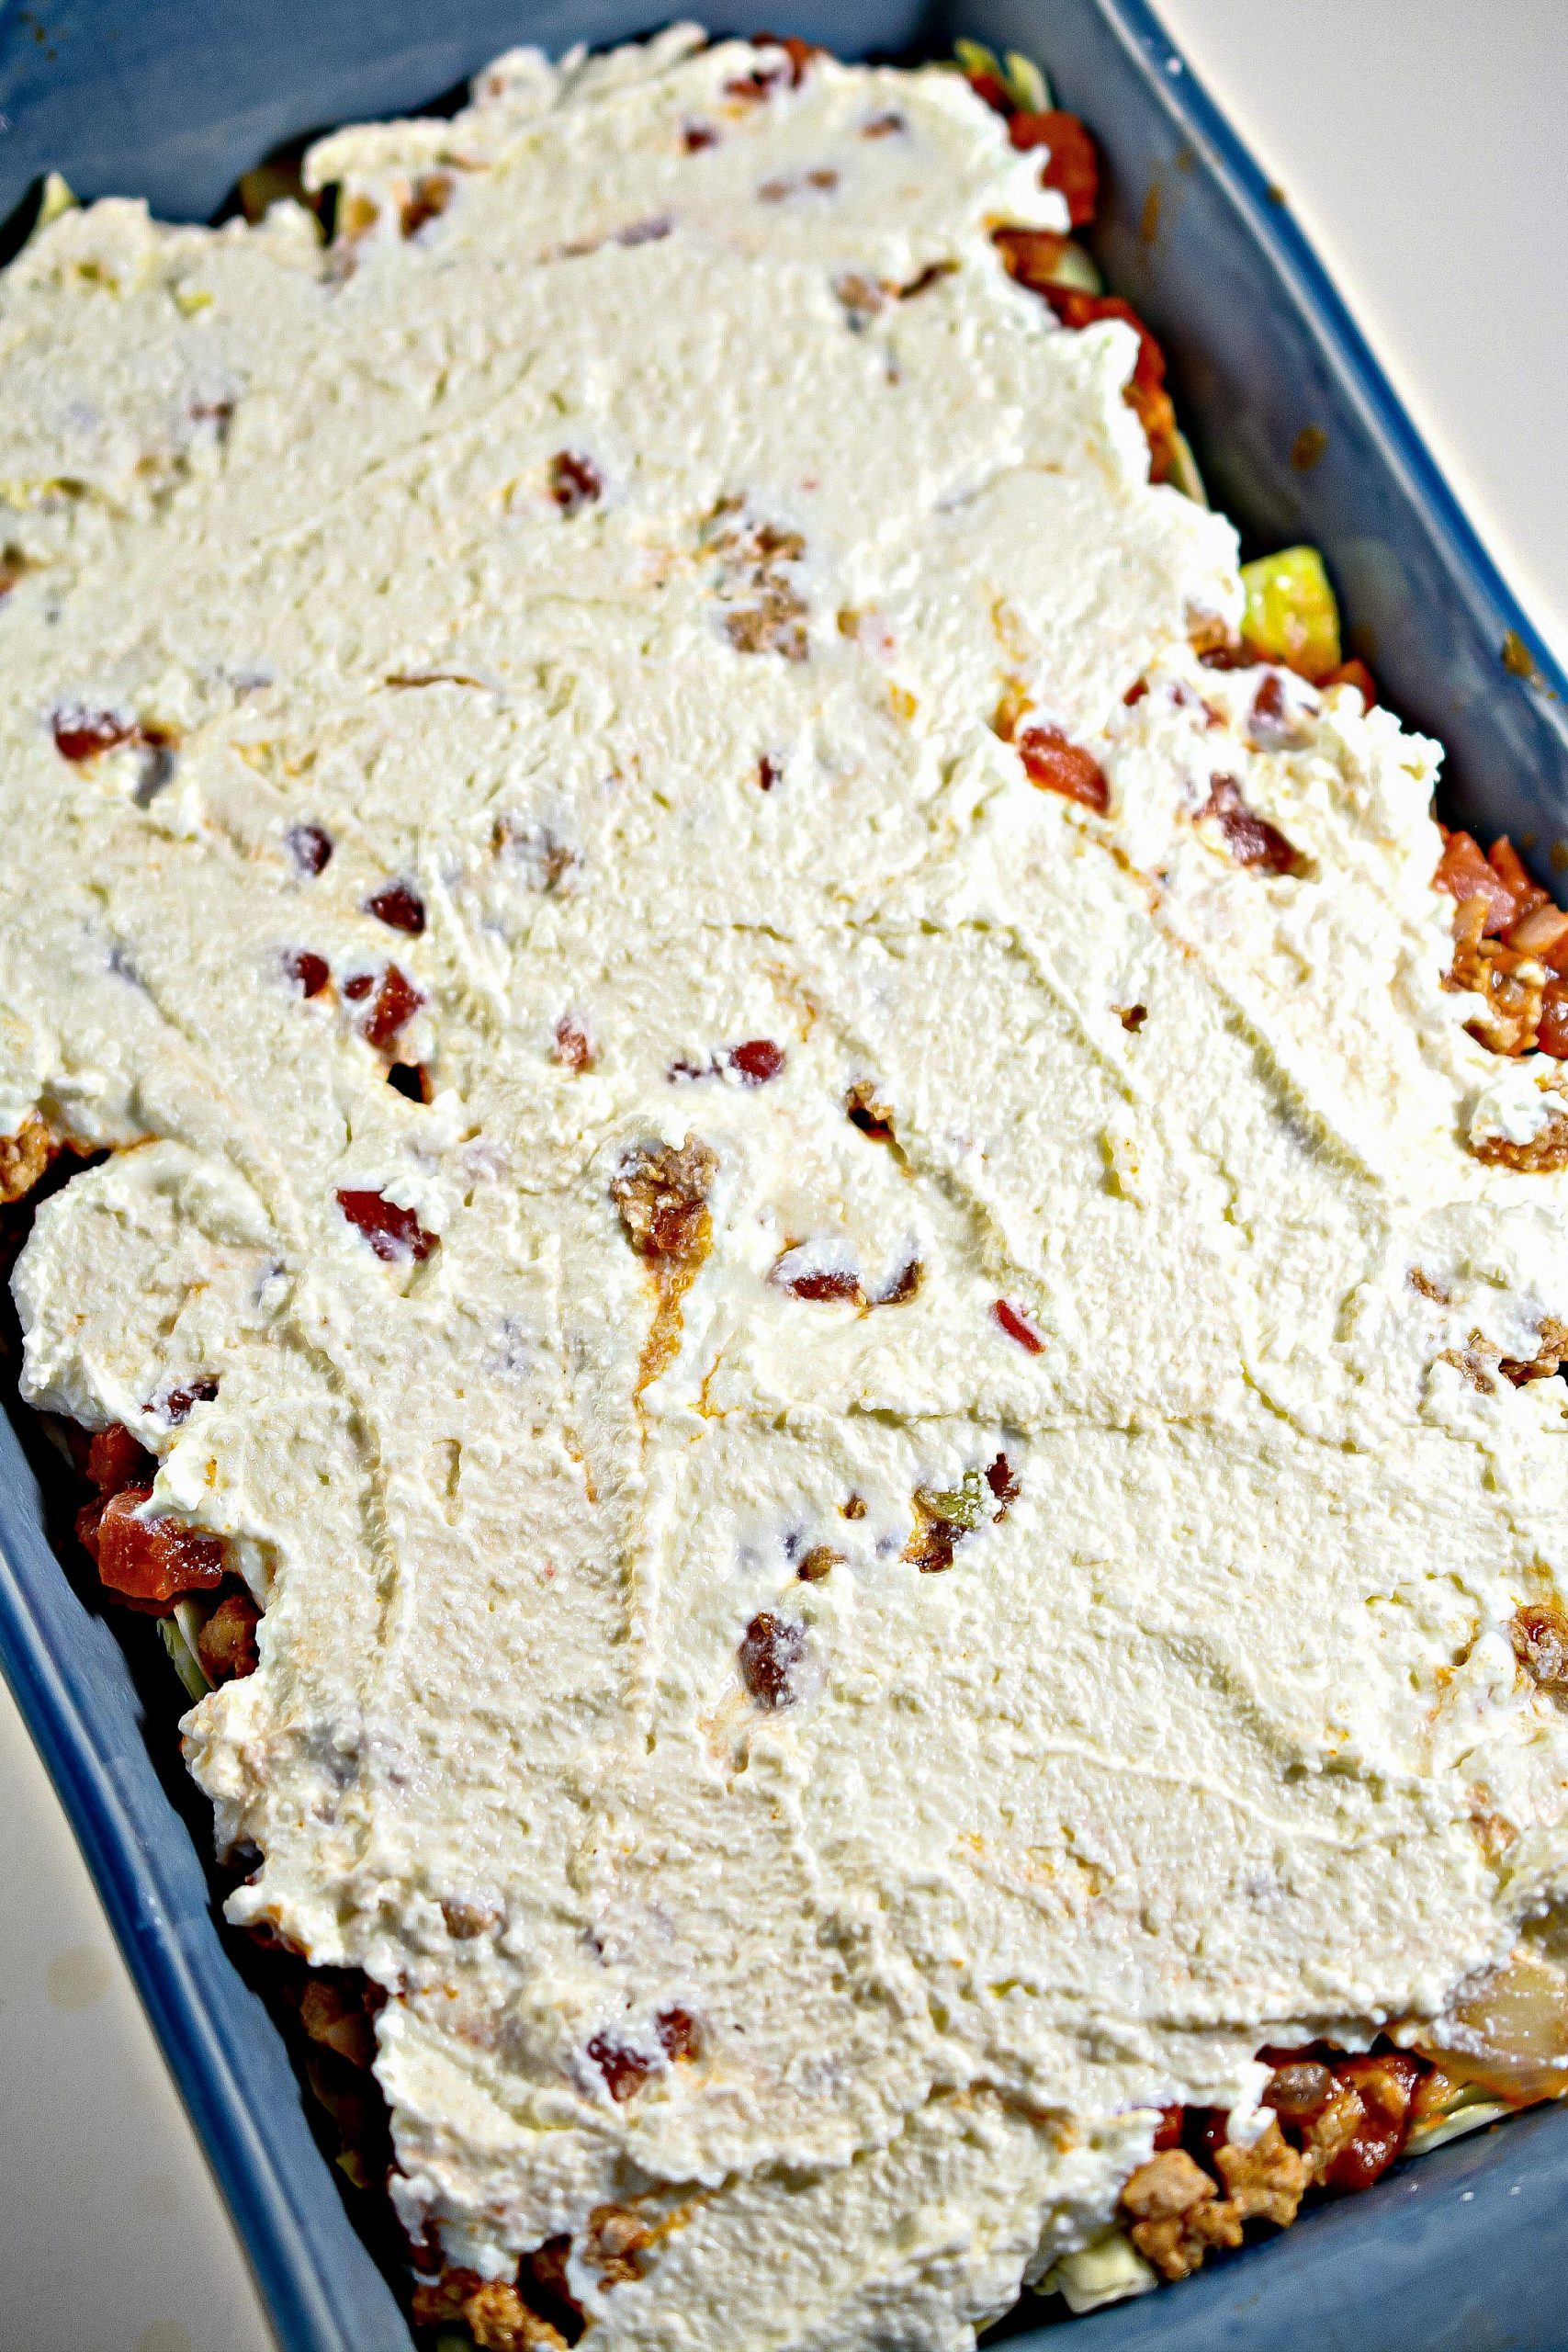 Place a layer of ricotta cheese over the casserole, 